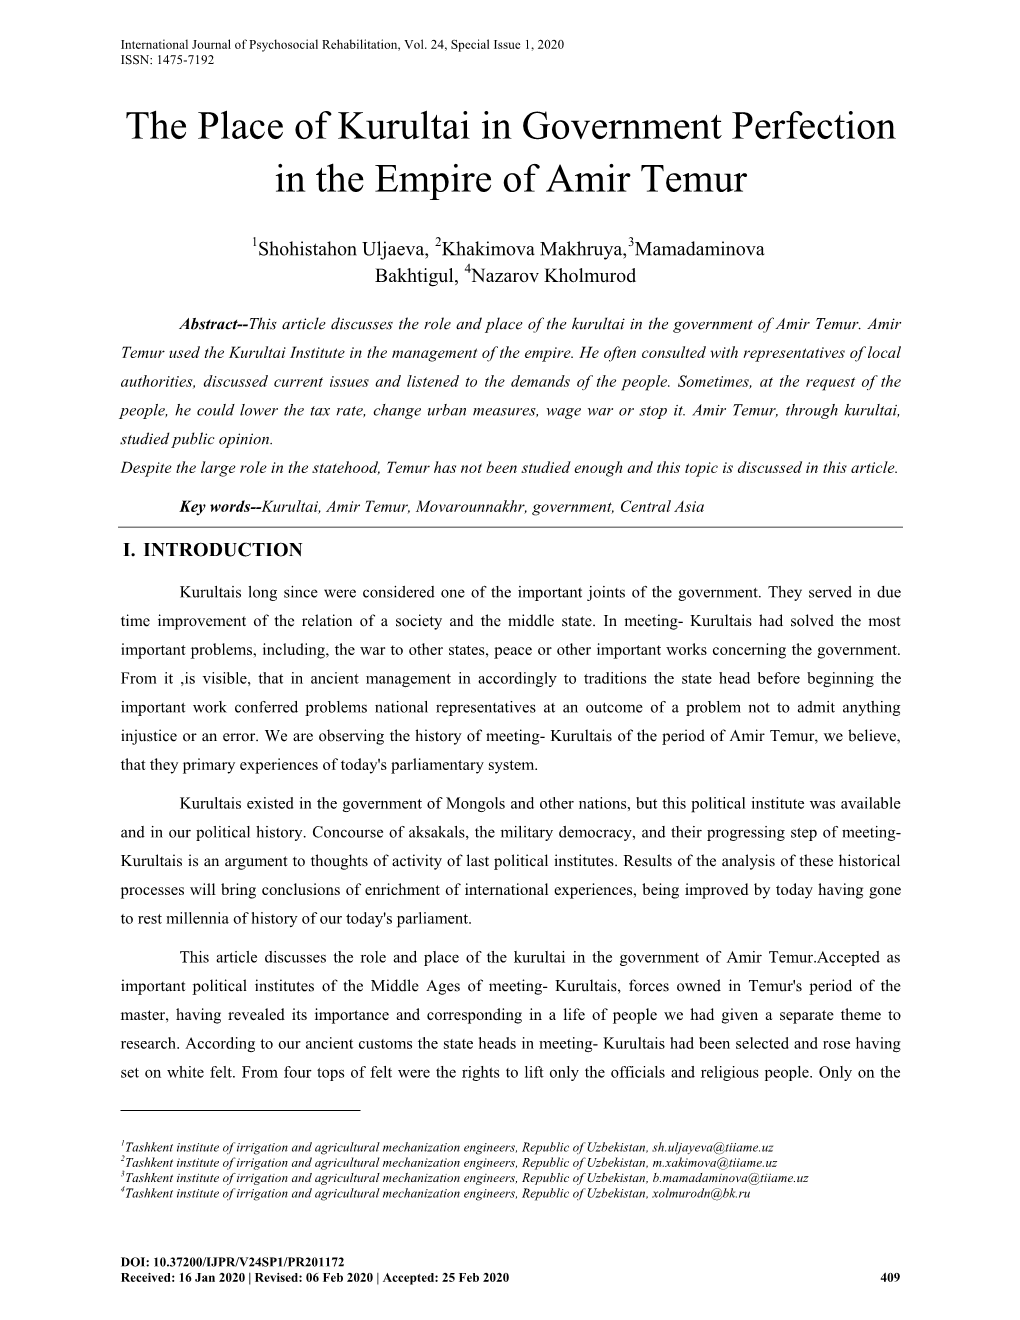 The Place of Kurultai in Government Perfection in the Empire of Amir Temur